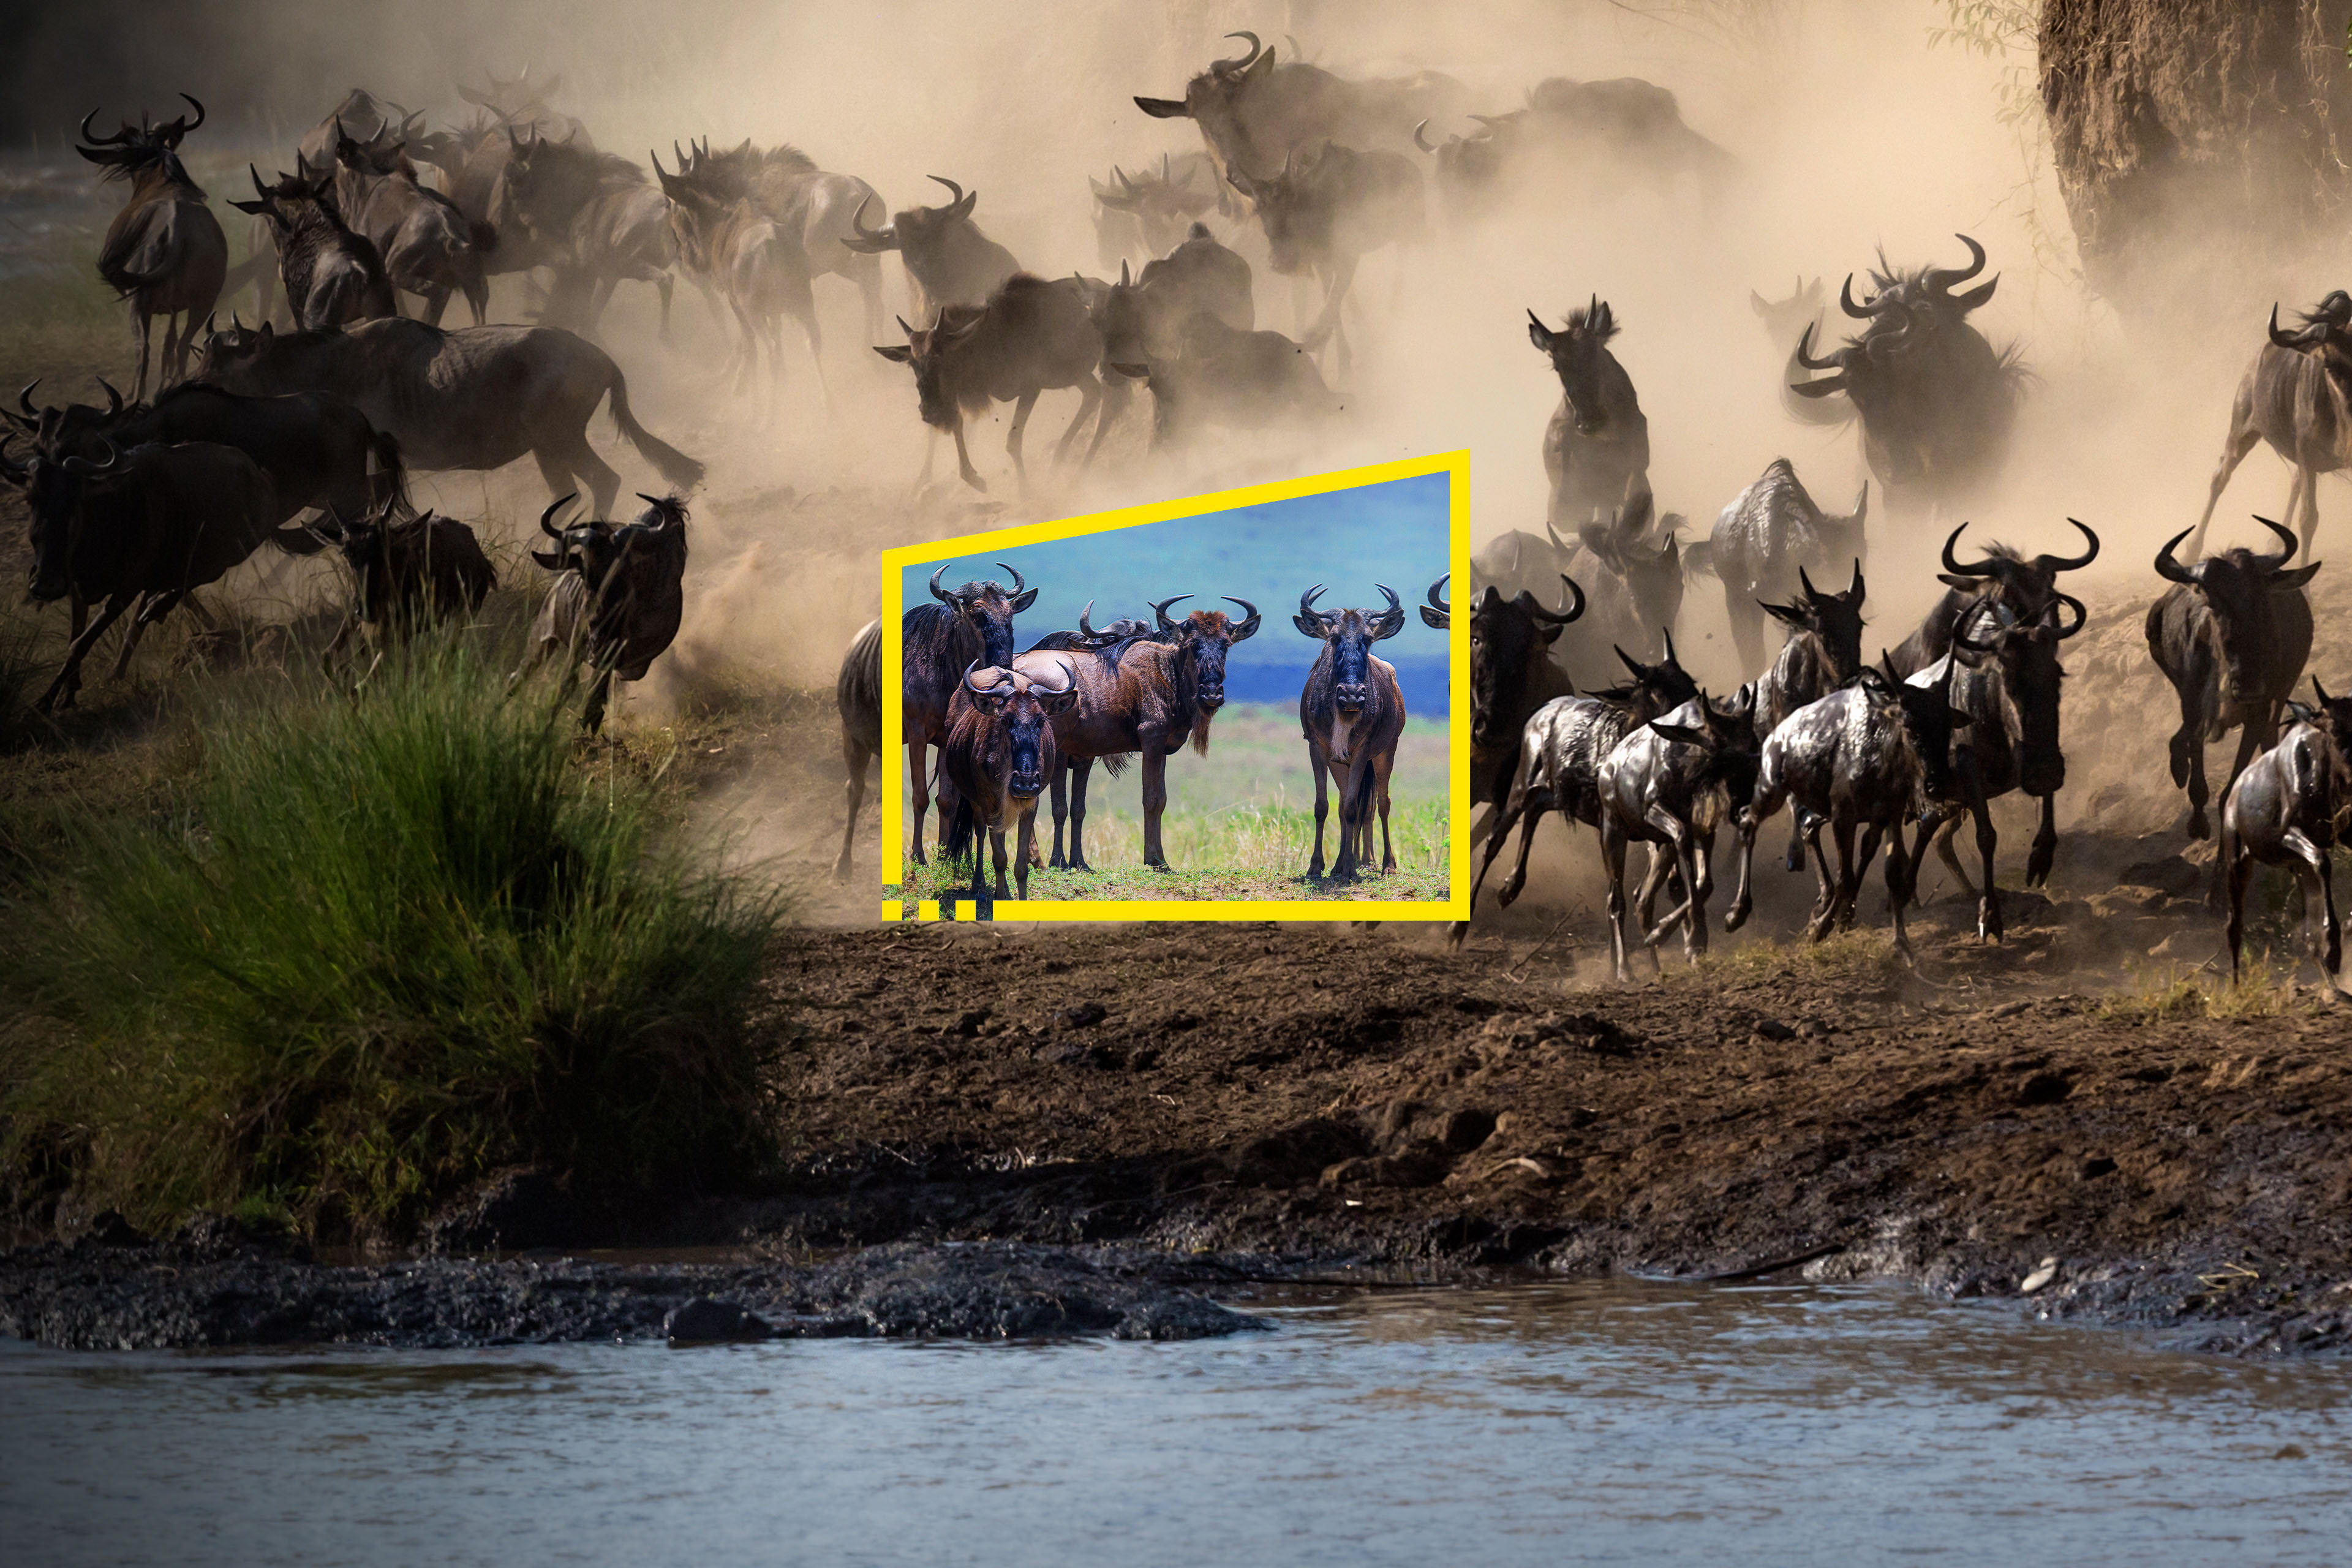 Reframe your future - wildebeest watering hole